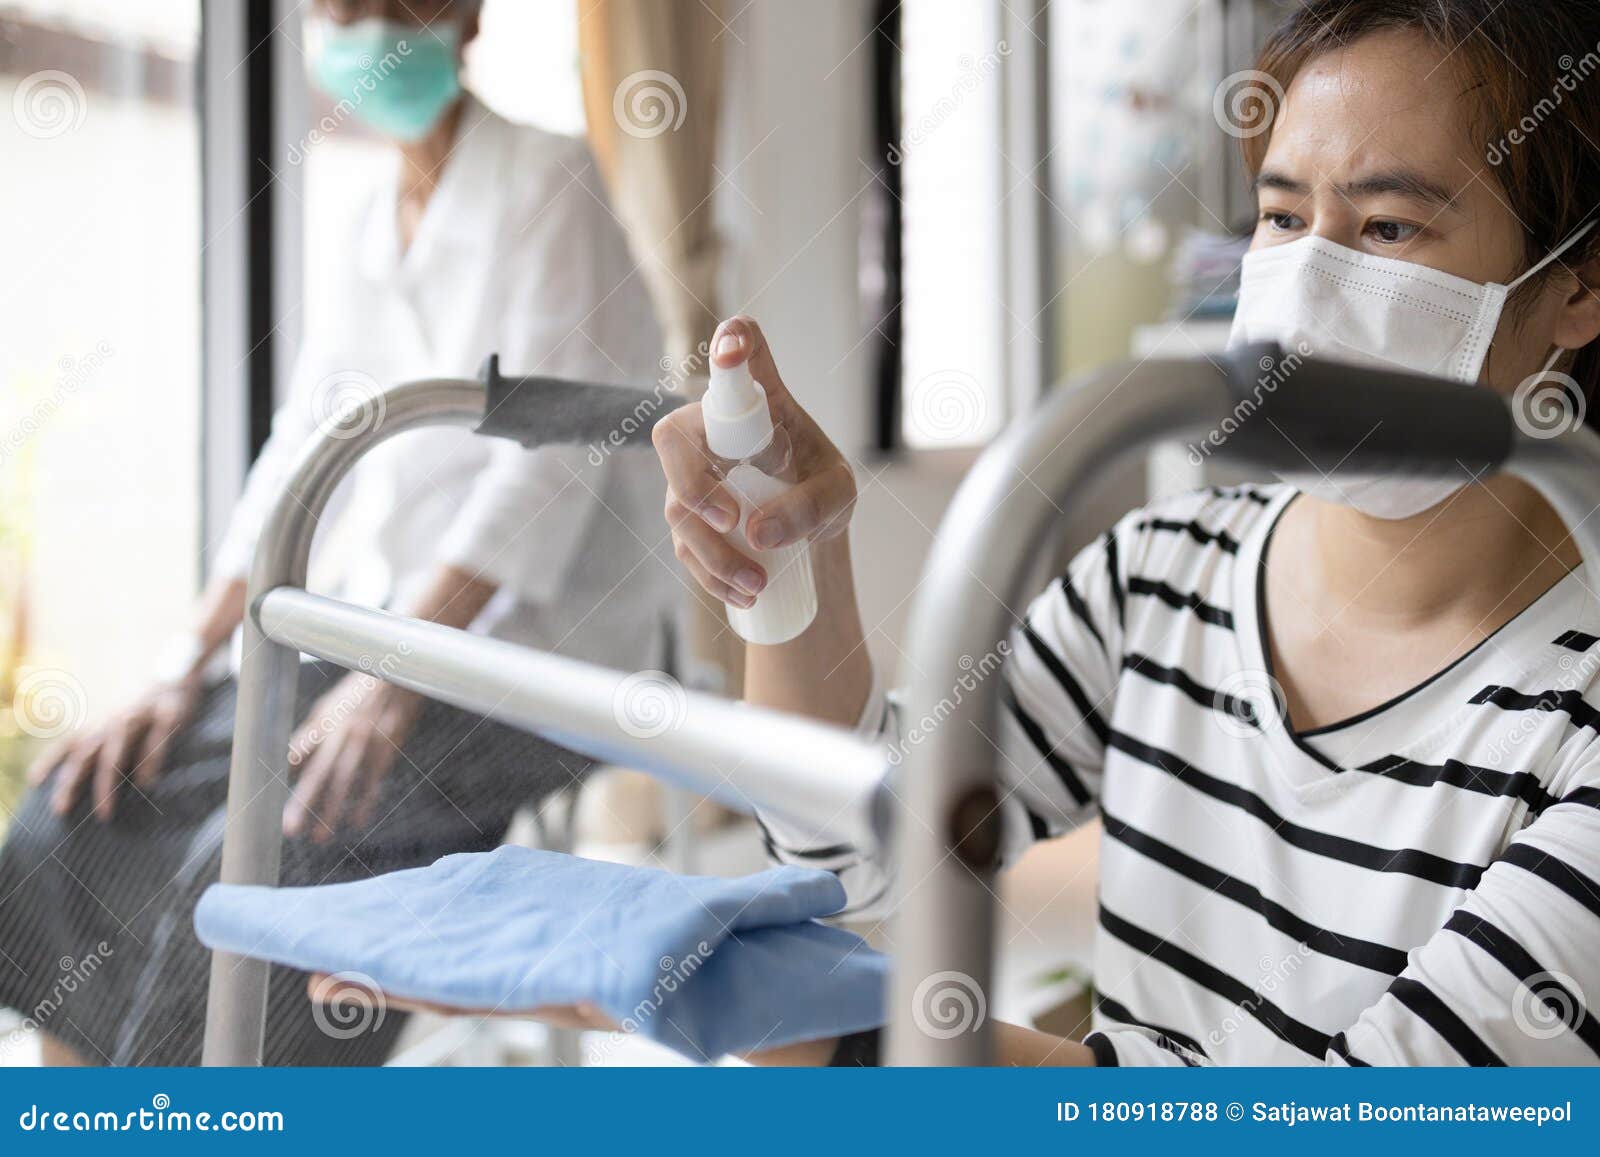 caregiver in a mask,using spraying alcohol antiseptic,disinfecting spray,cleaning on walking aids,walker for the senior,during